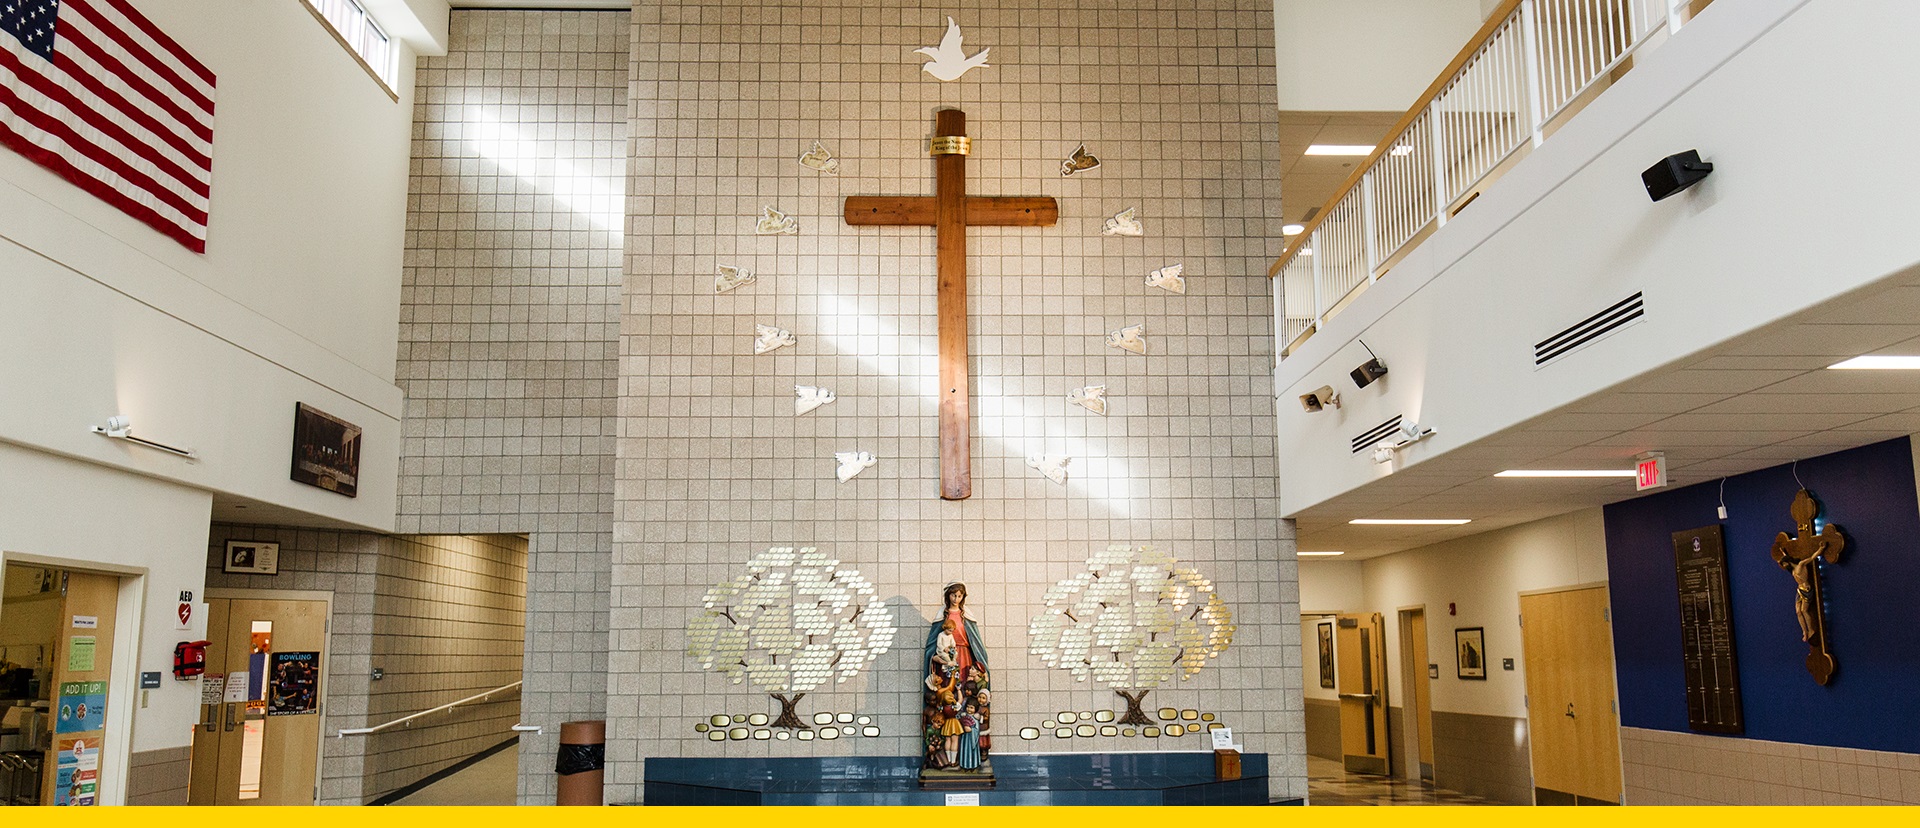 St. Mary's Catholic School entryway with a large wooden Cross in the center